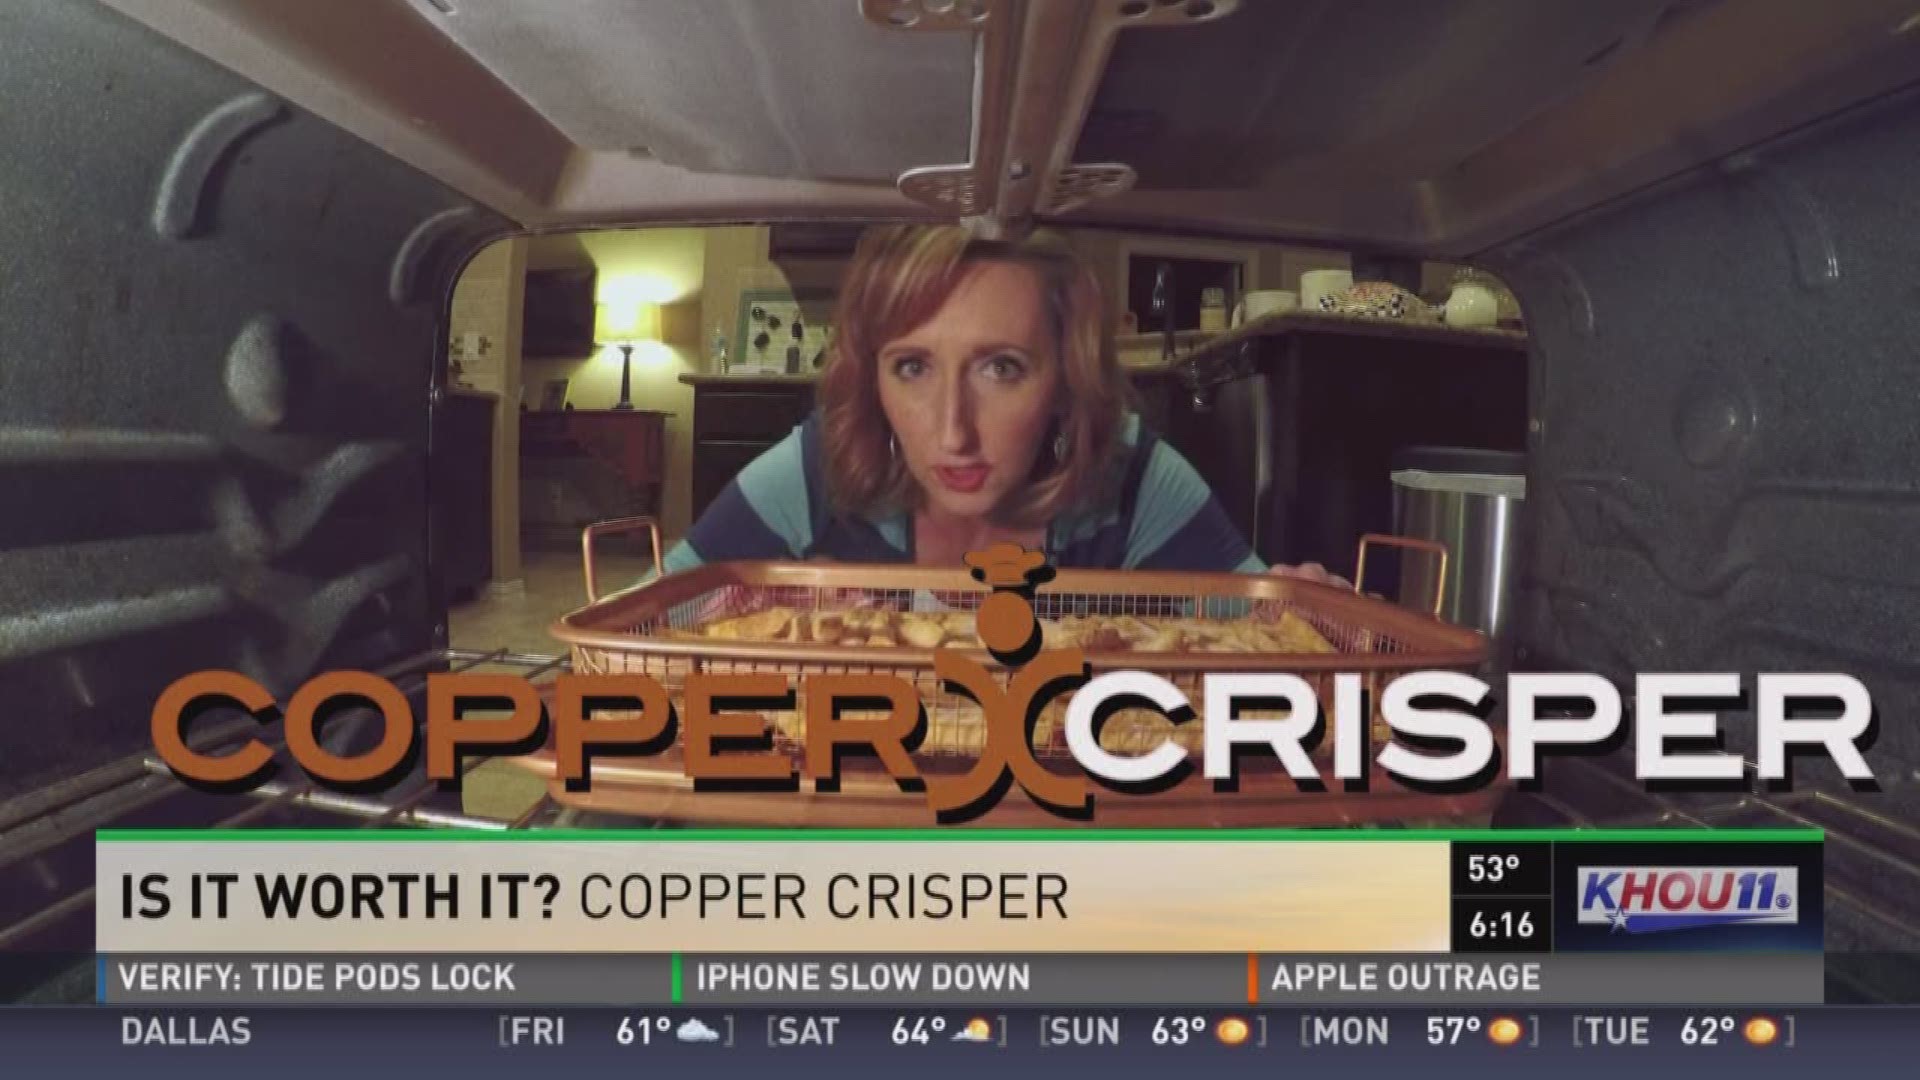 KHOU 11's Tiffany Craig checks out the claim that the Copper Crisper will make food healthier and tastier